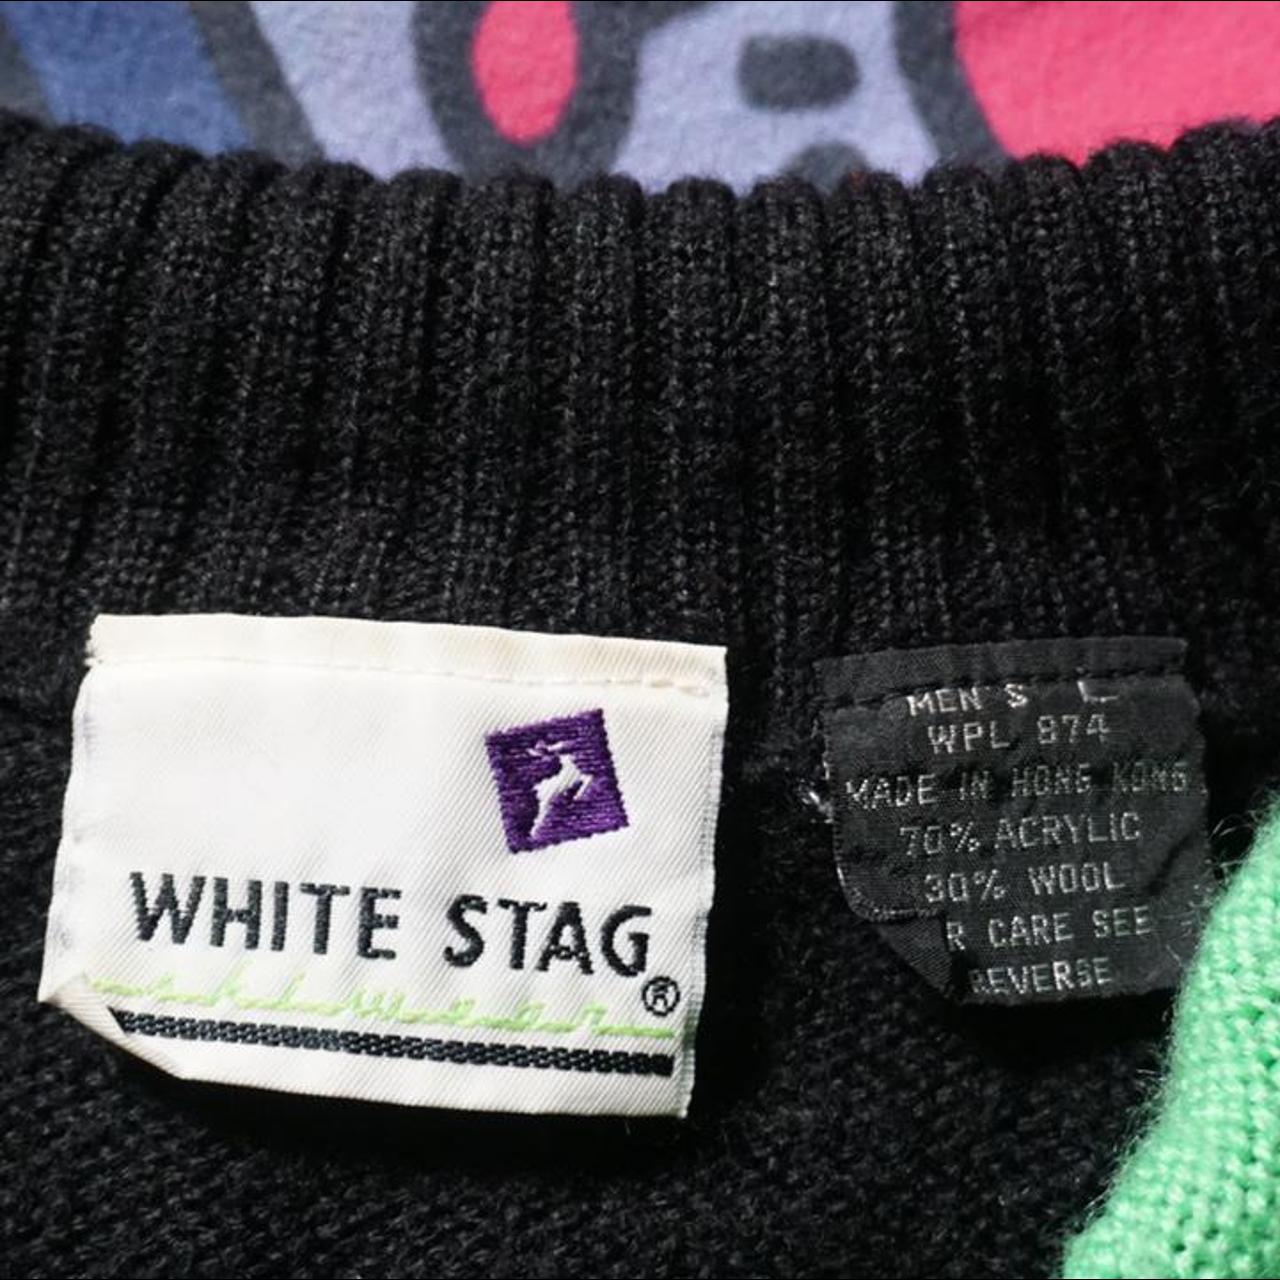 Product Image 4 - Vintage White Stag Half-Zip Sweater

Cool